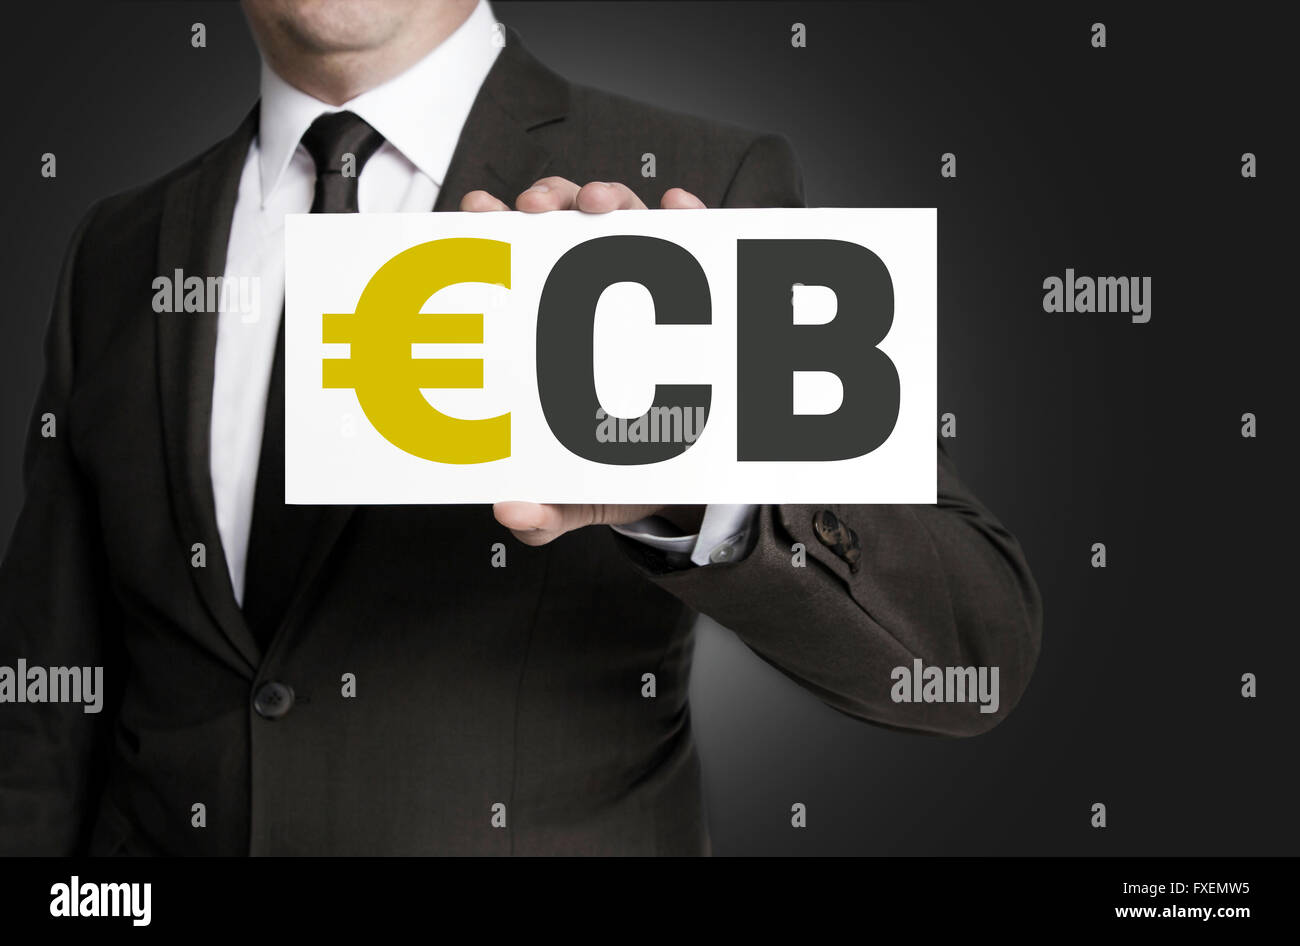 ecb sign is held by businessman background. Stock Photo